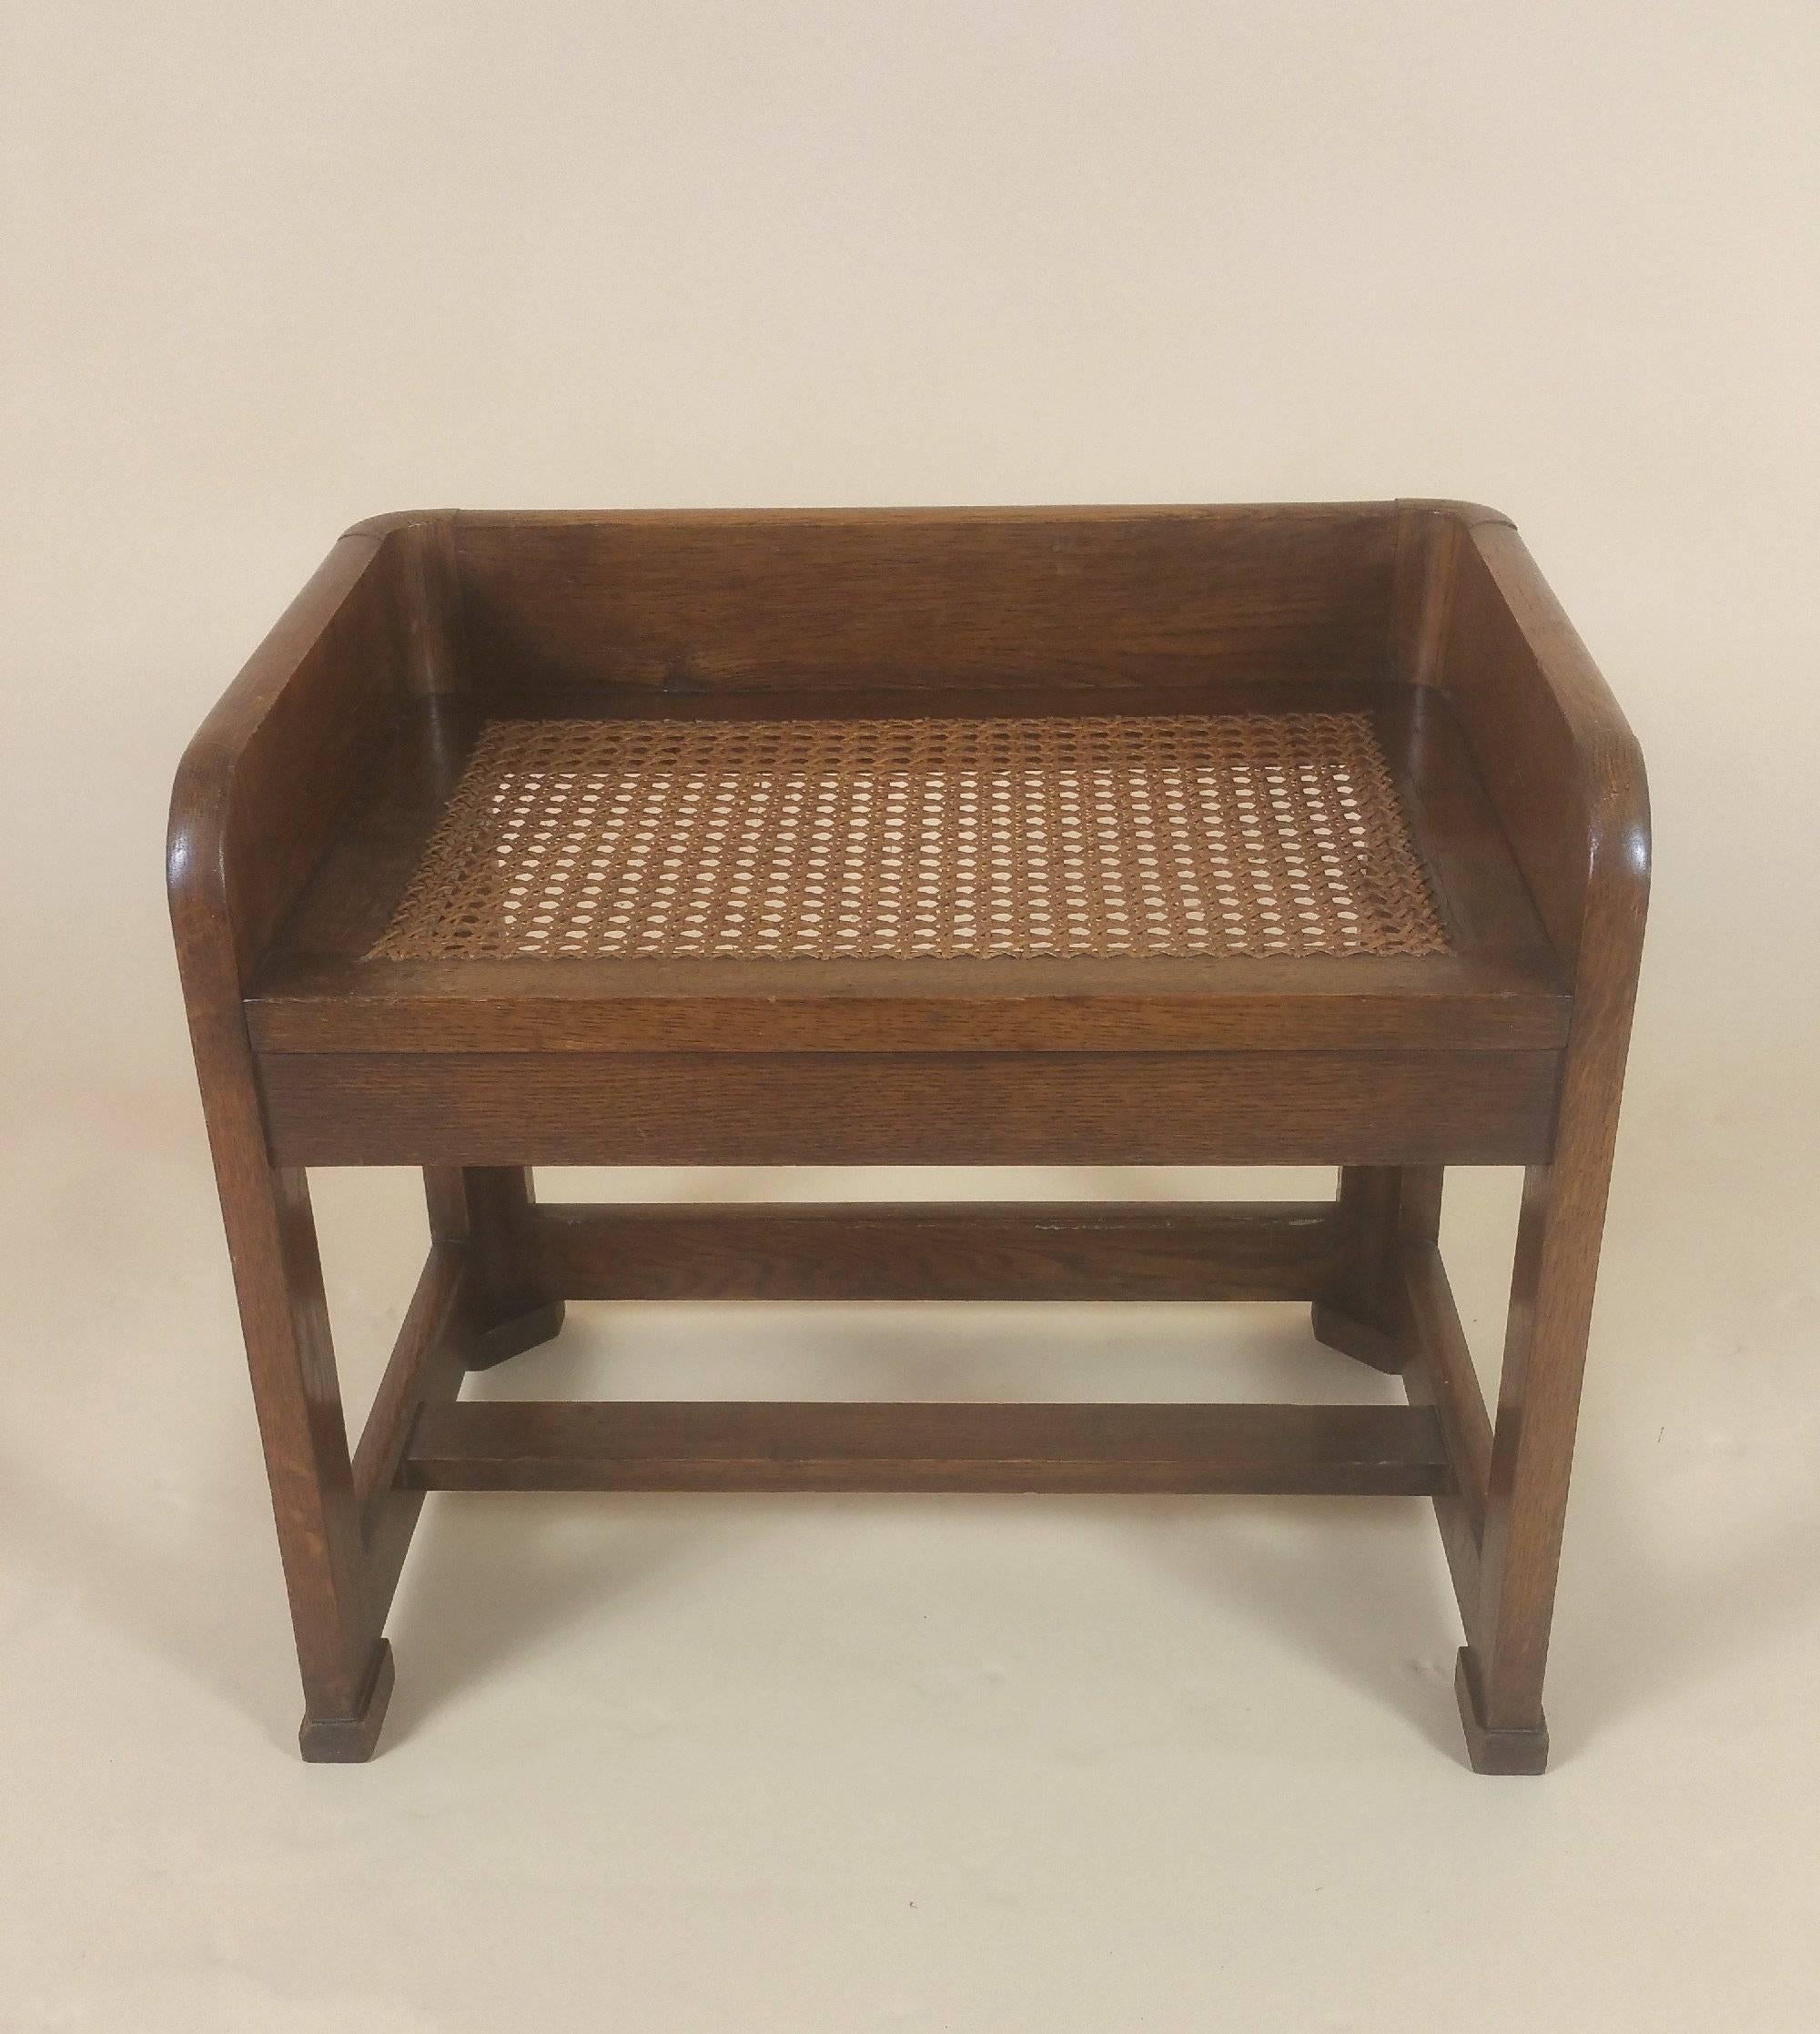 This unusual and very attractive rectangular Art Deco shaped stool is made of Oak and features a Bergere sectioned seat. The Stool has a high gallery back and sides with an H frame stretcher base. It measures 20 in – 50.8 cm wide, 14 in – 35.5 cm